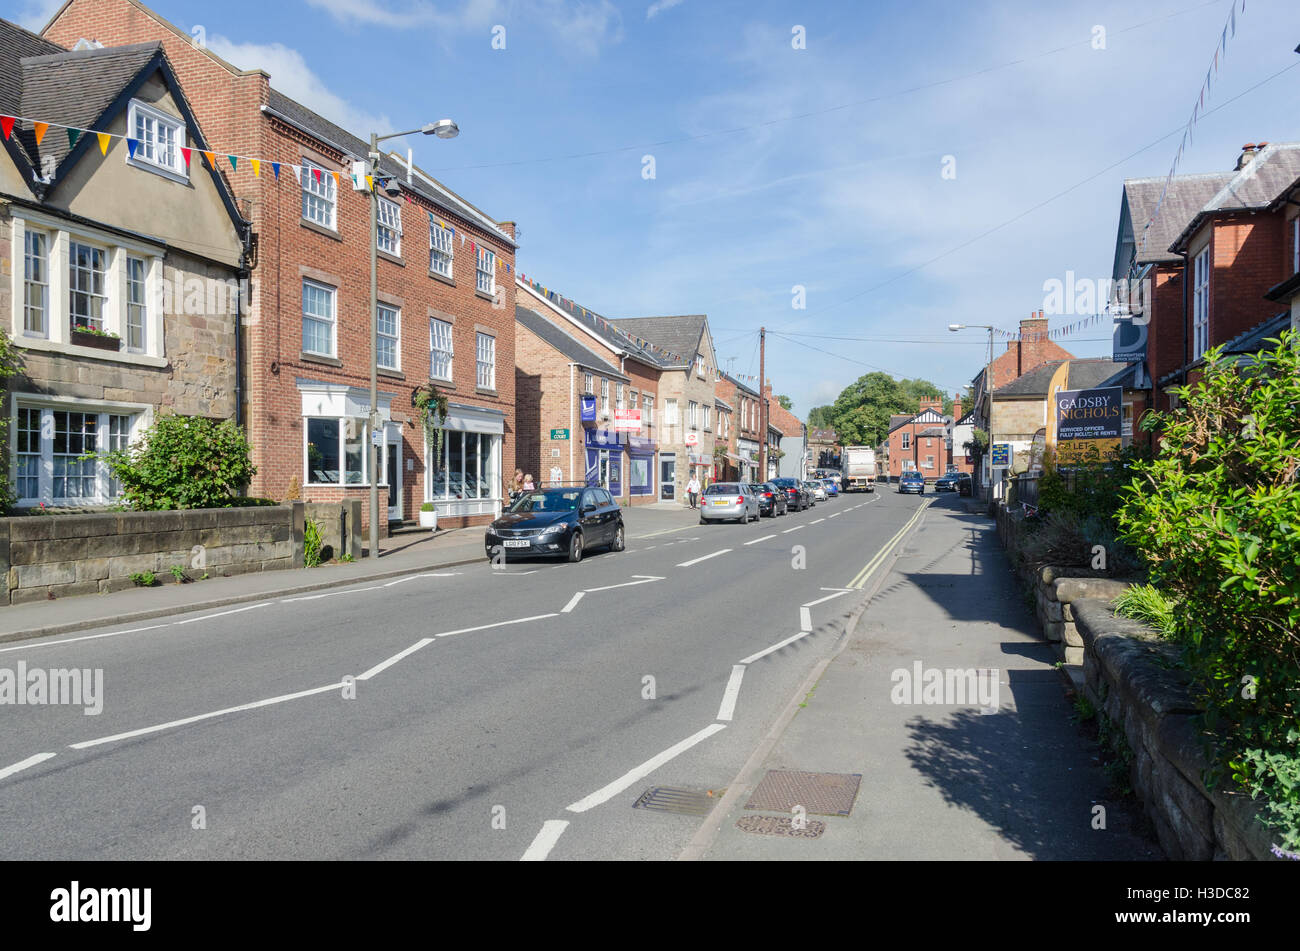 The main road running through the Derbyshire town of Duffield Stock Photo